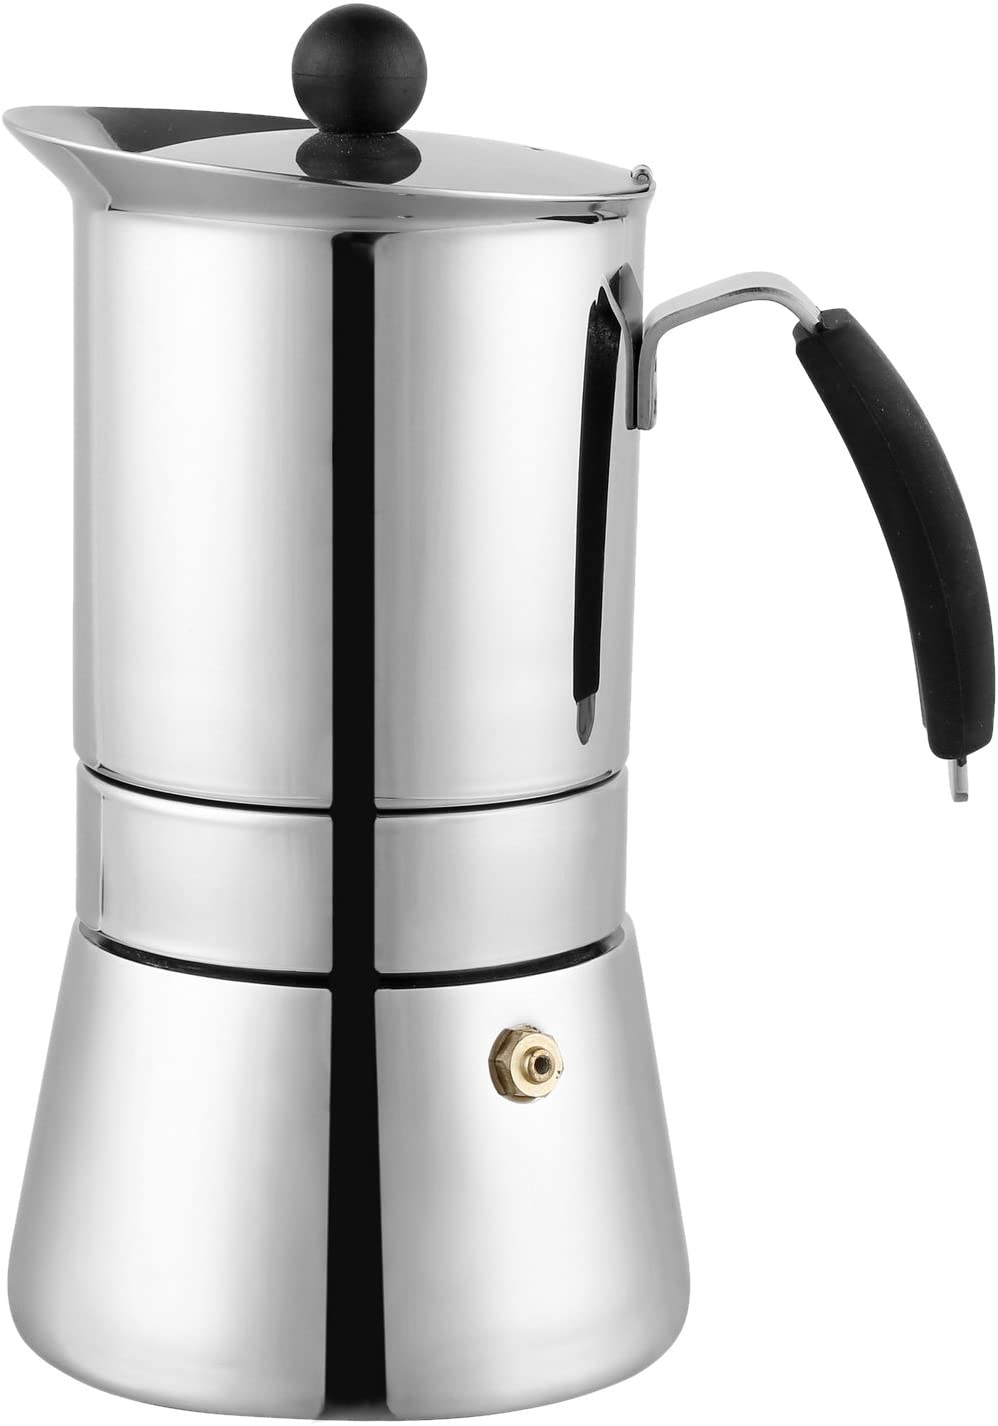 Amore Espresso Coffee Maker 6 Cups Stainless Steel And Black Handle